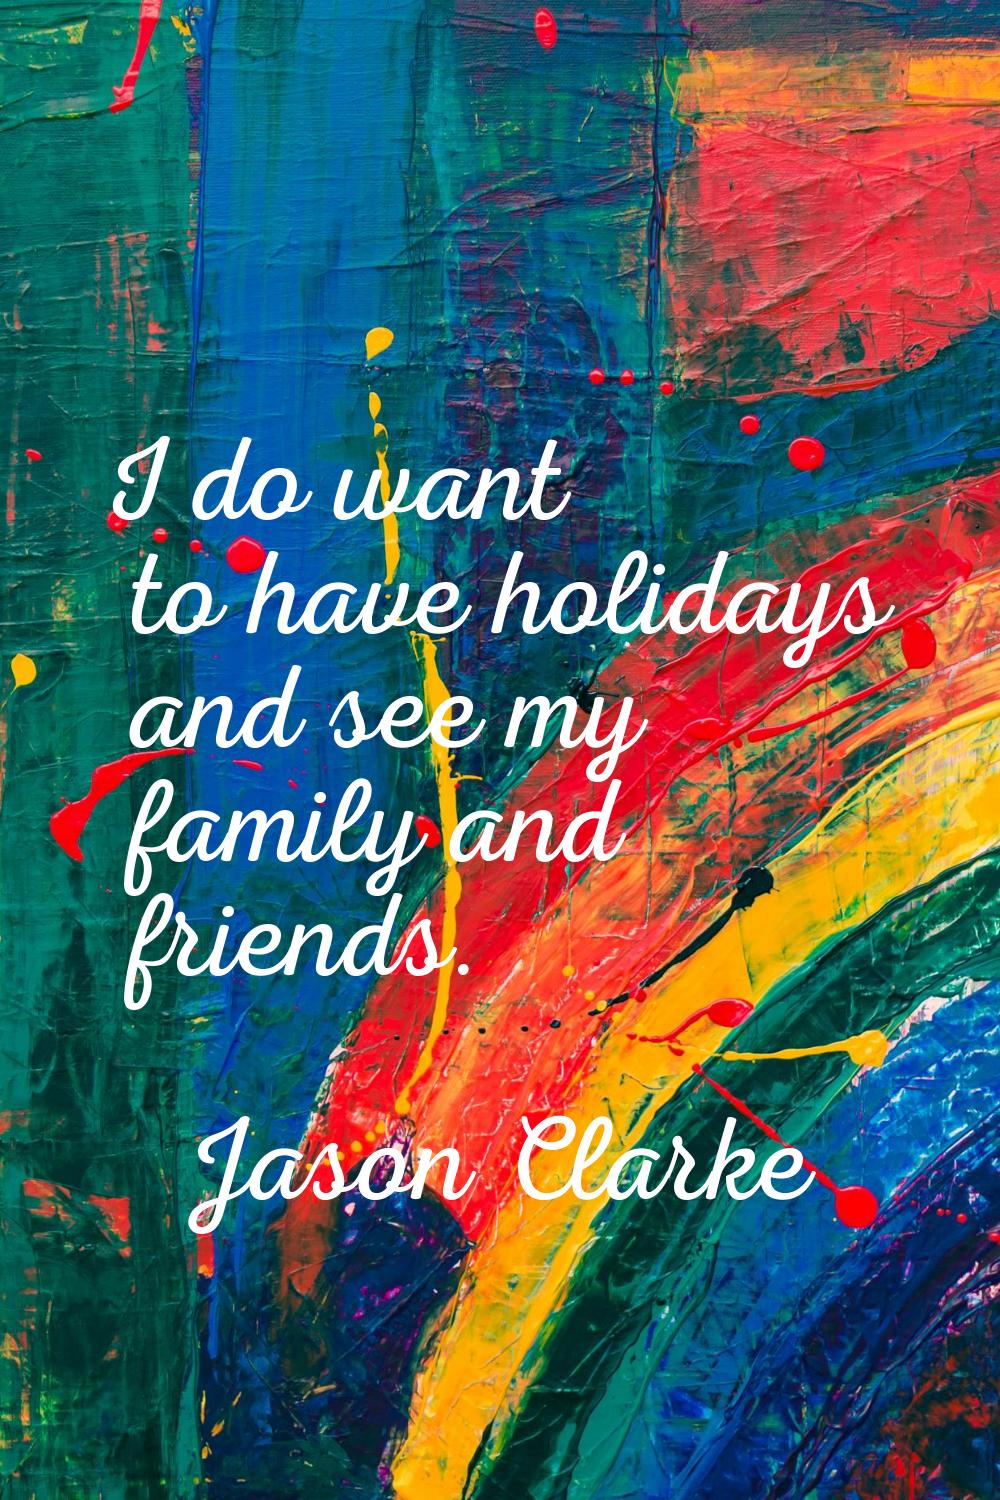 I do want to have holidays and see my family and friends.